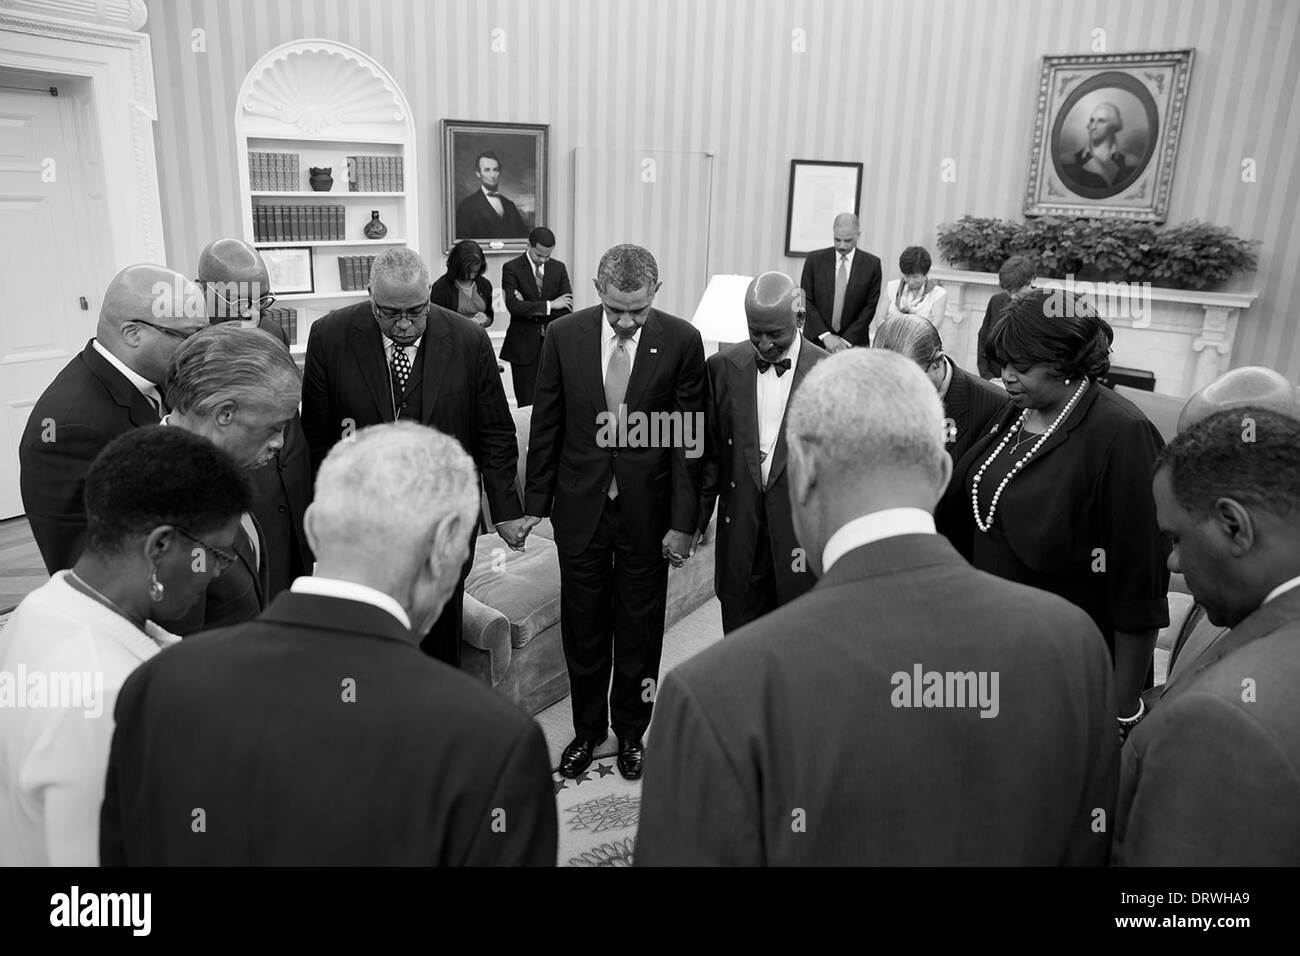 US President Barack Obama prays with faith leaders in the Oval Office of the White House following a meeting to discuss the 50th anniversary of the March on Washington for Jobs and Freedom August 26, 2013 in Washington, DC. Stock Photo